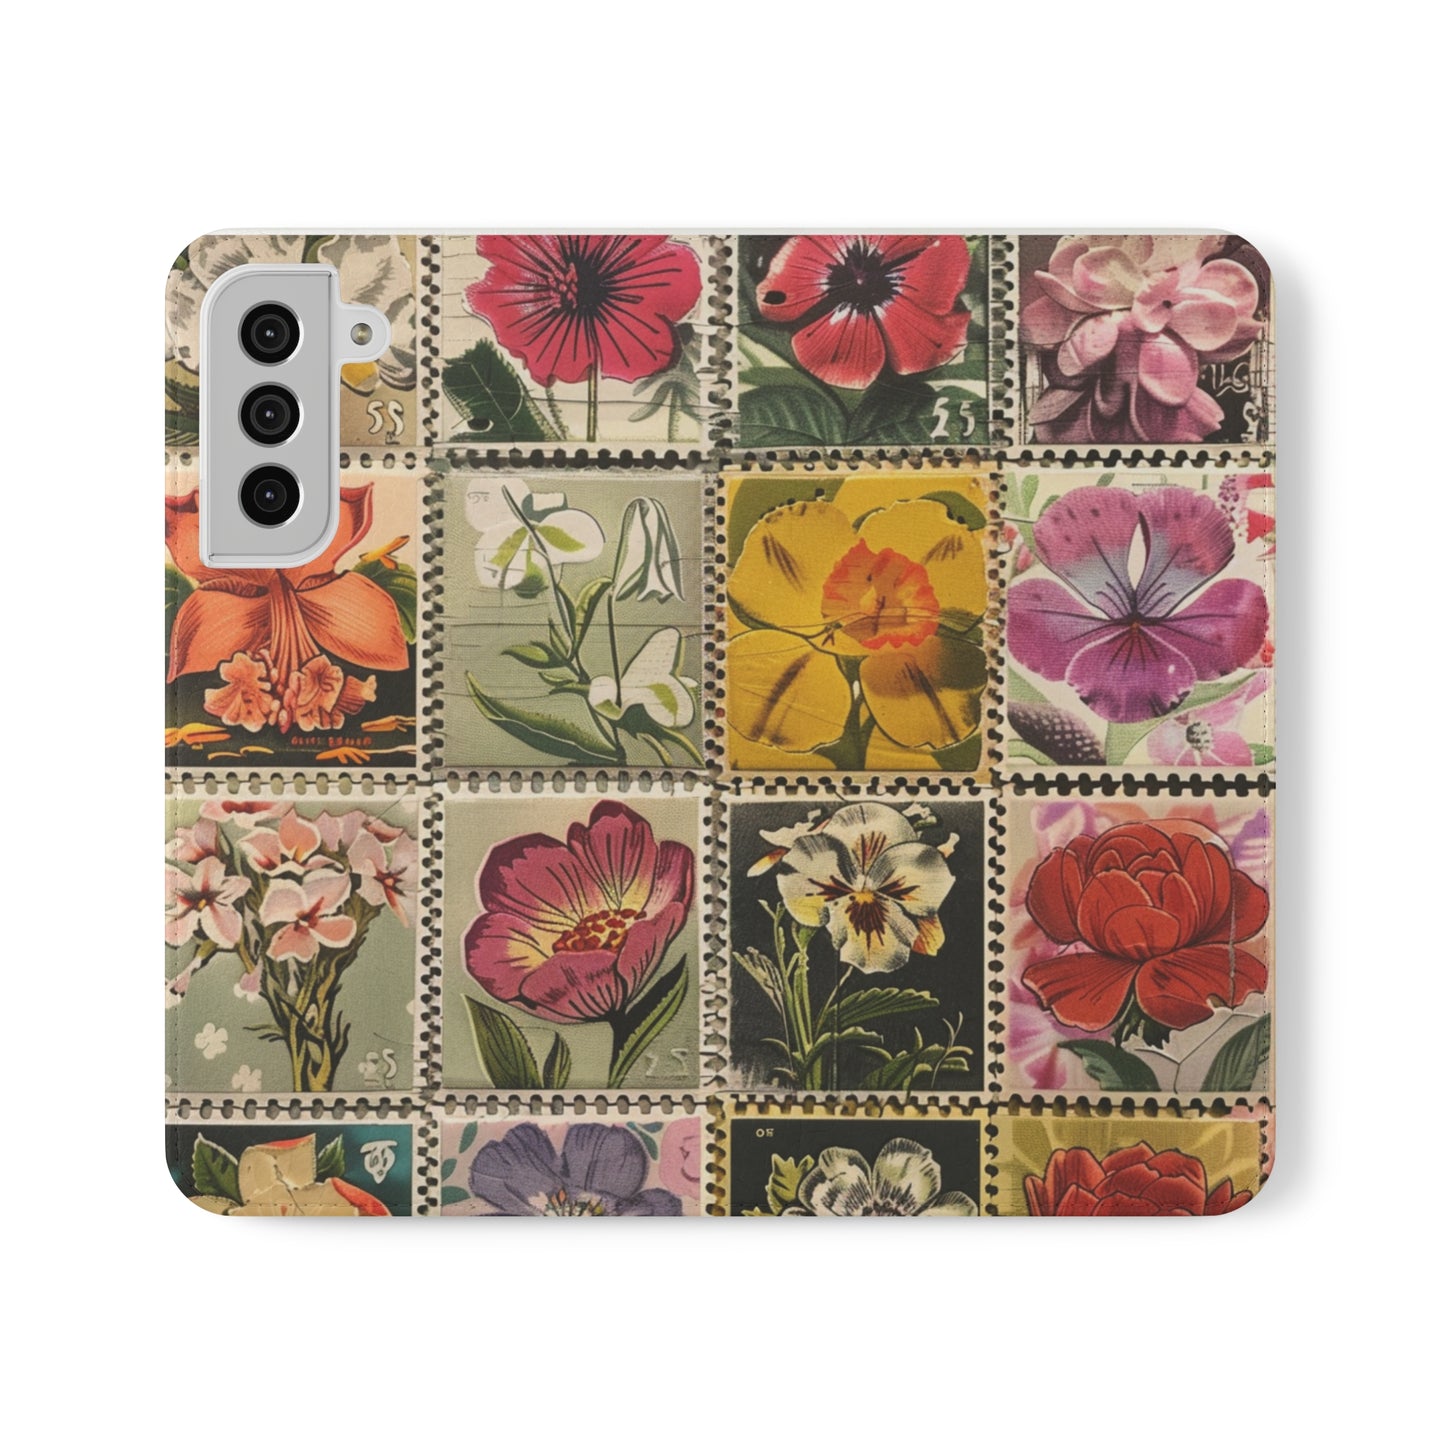 Elegant stamp collection case for iPhone 12 Pro